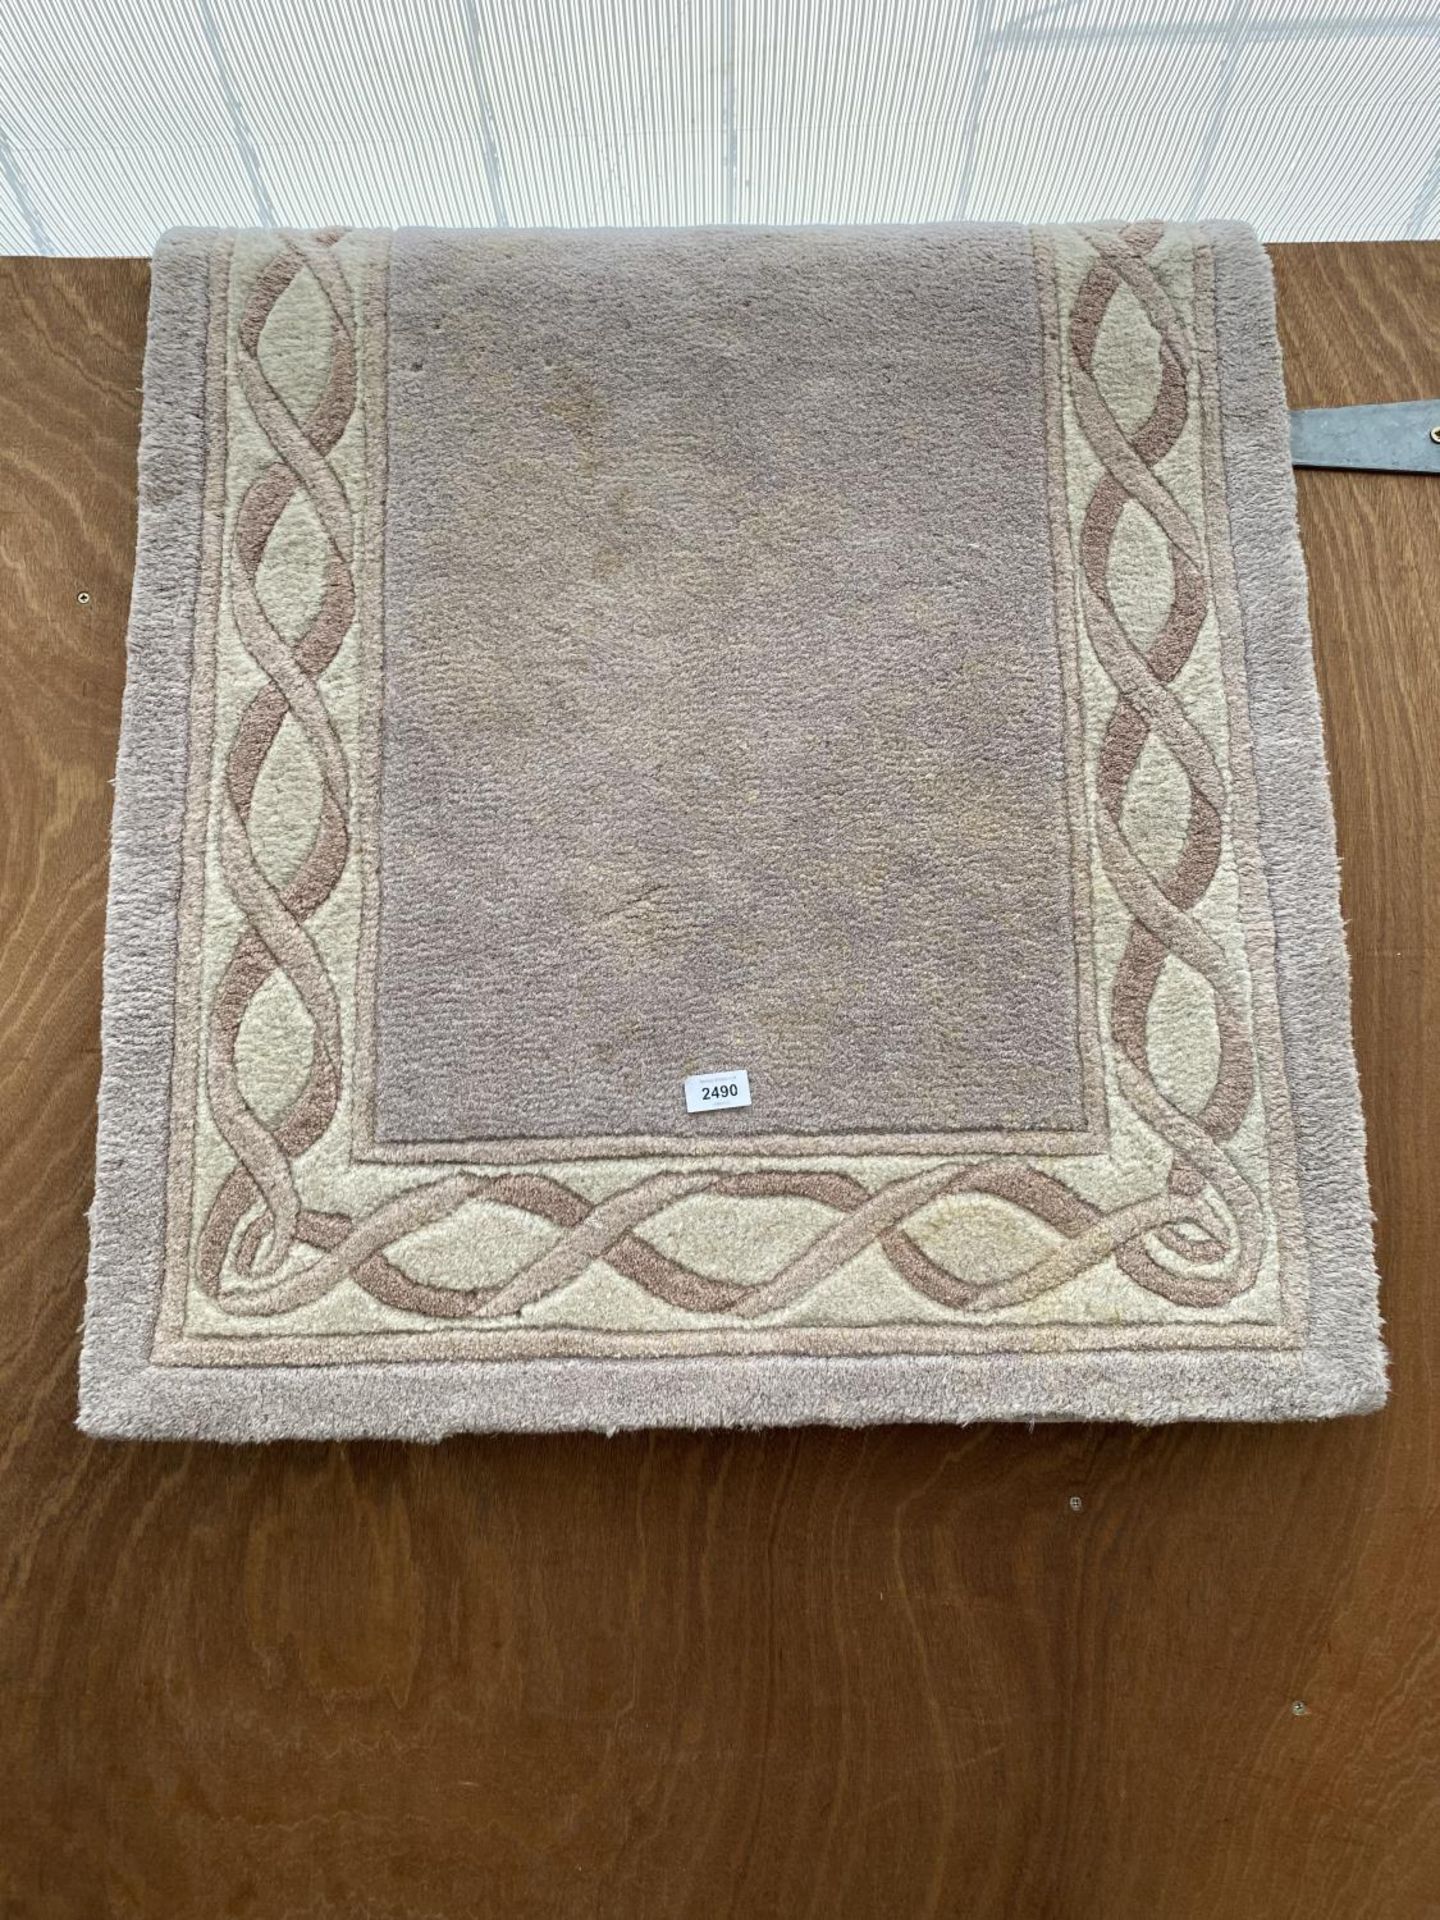 A SMALL CREAM PATTERNED RUG